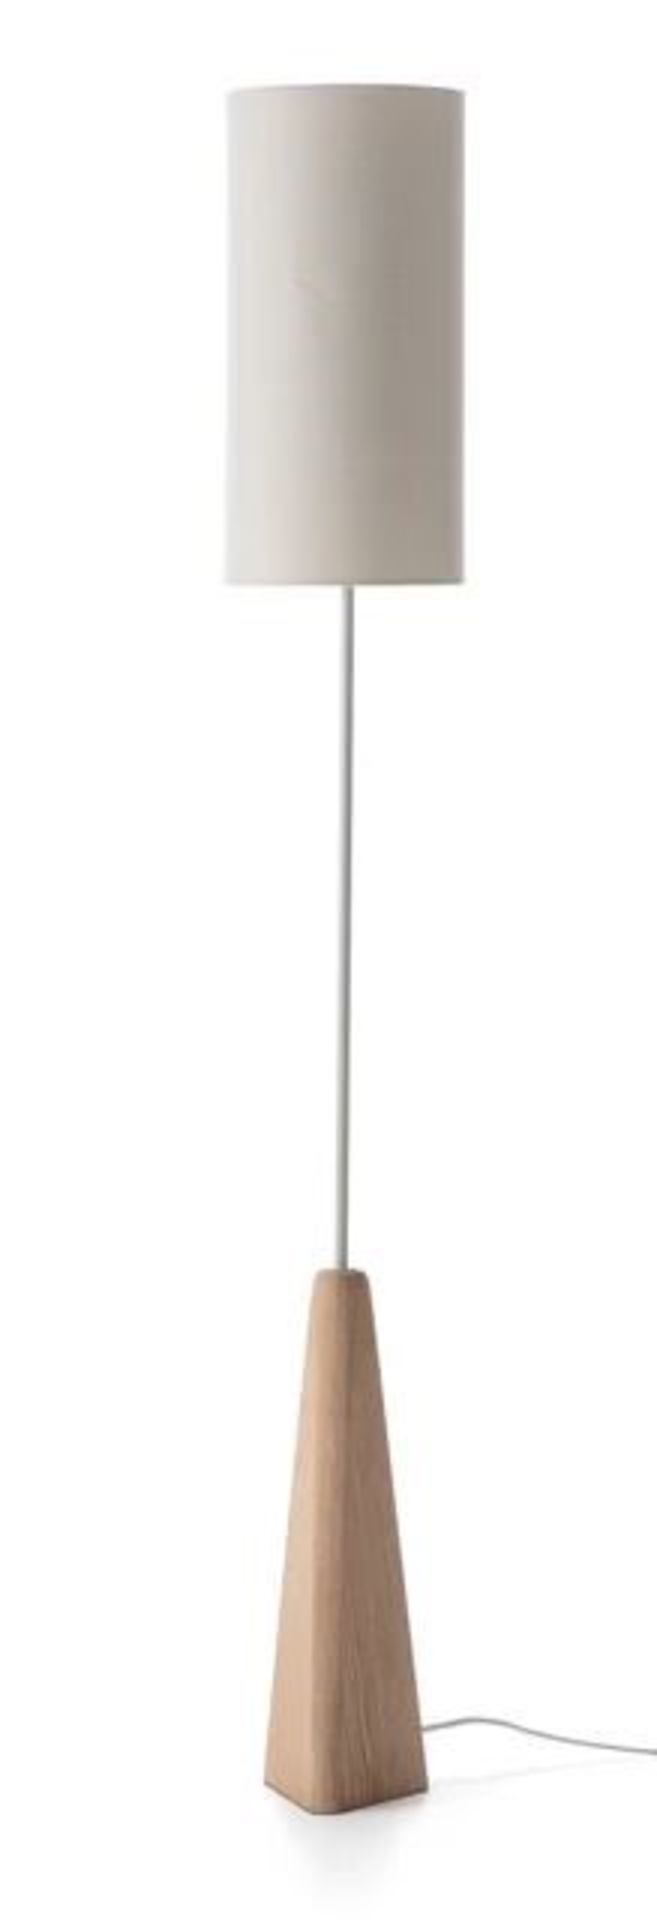 LA REDOUTE NESTWOOD READING LAMP IN SOLID OAK AND LINEN